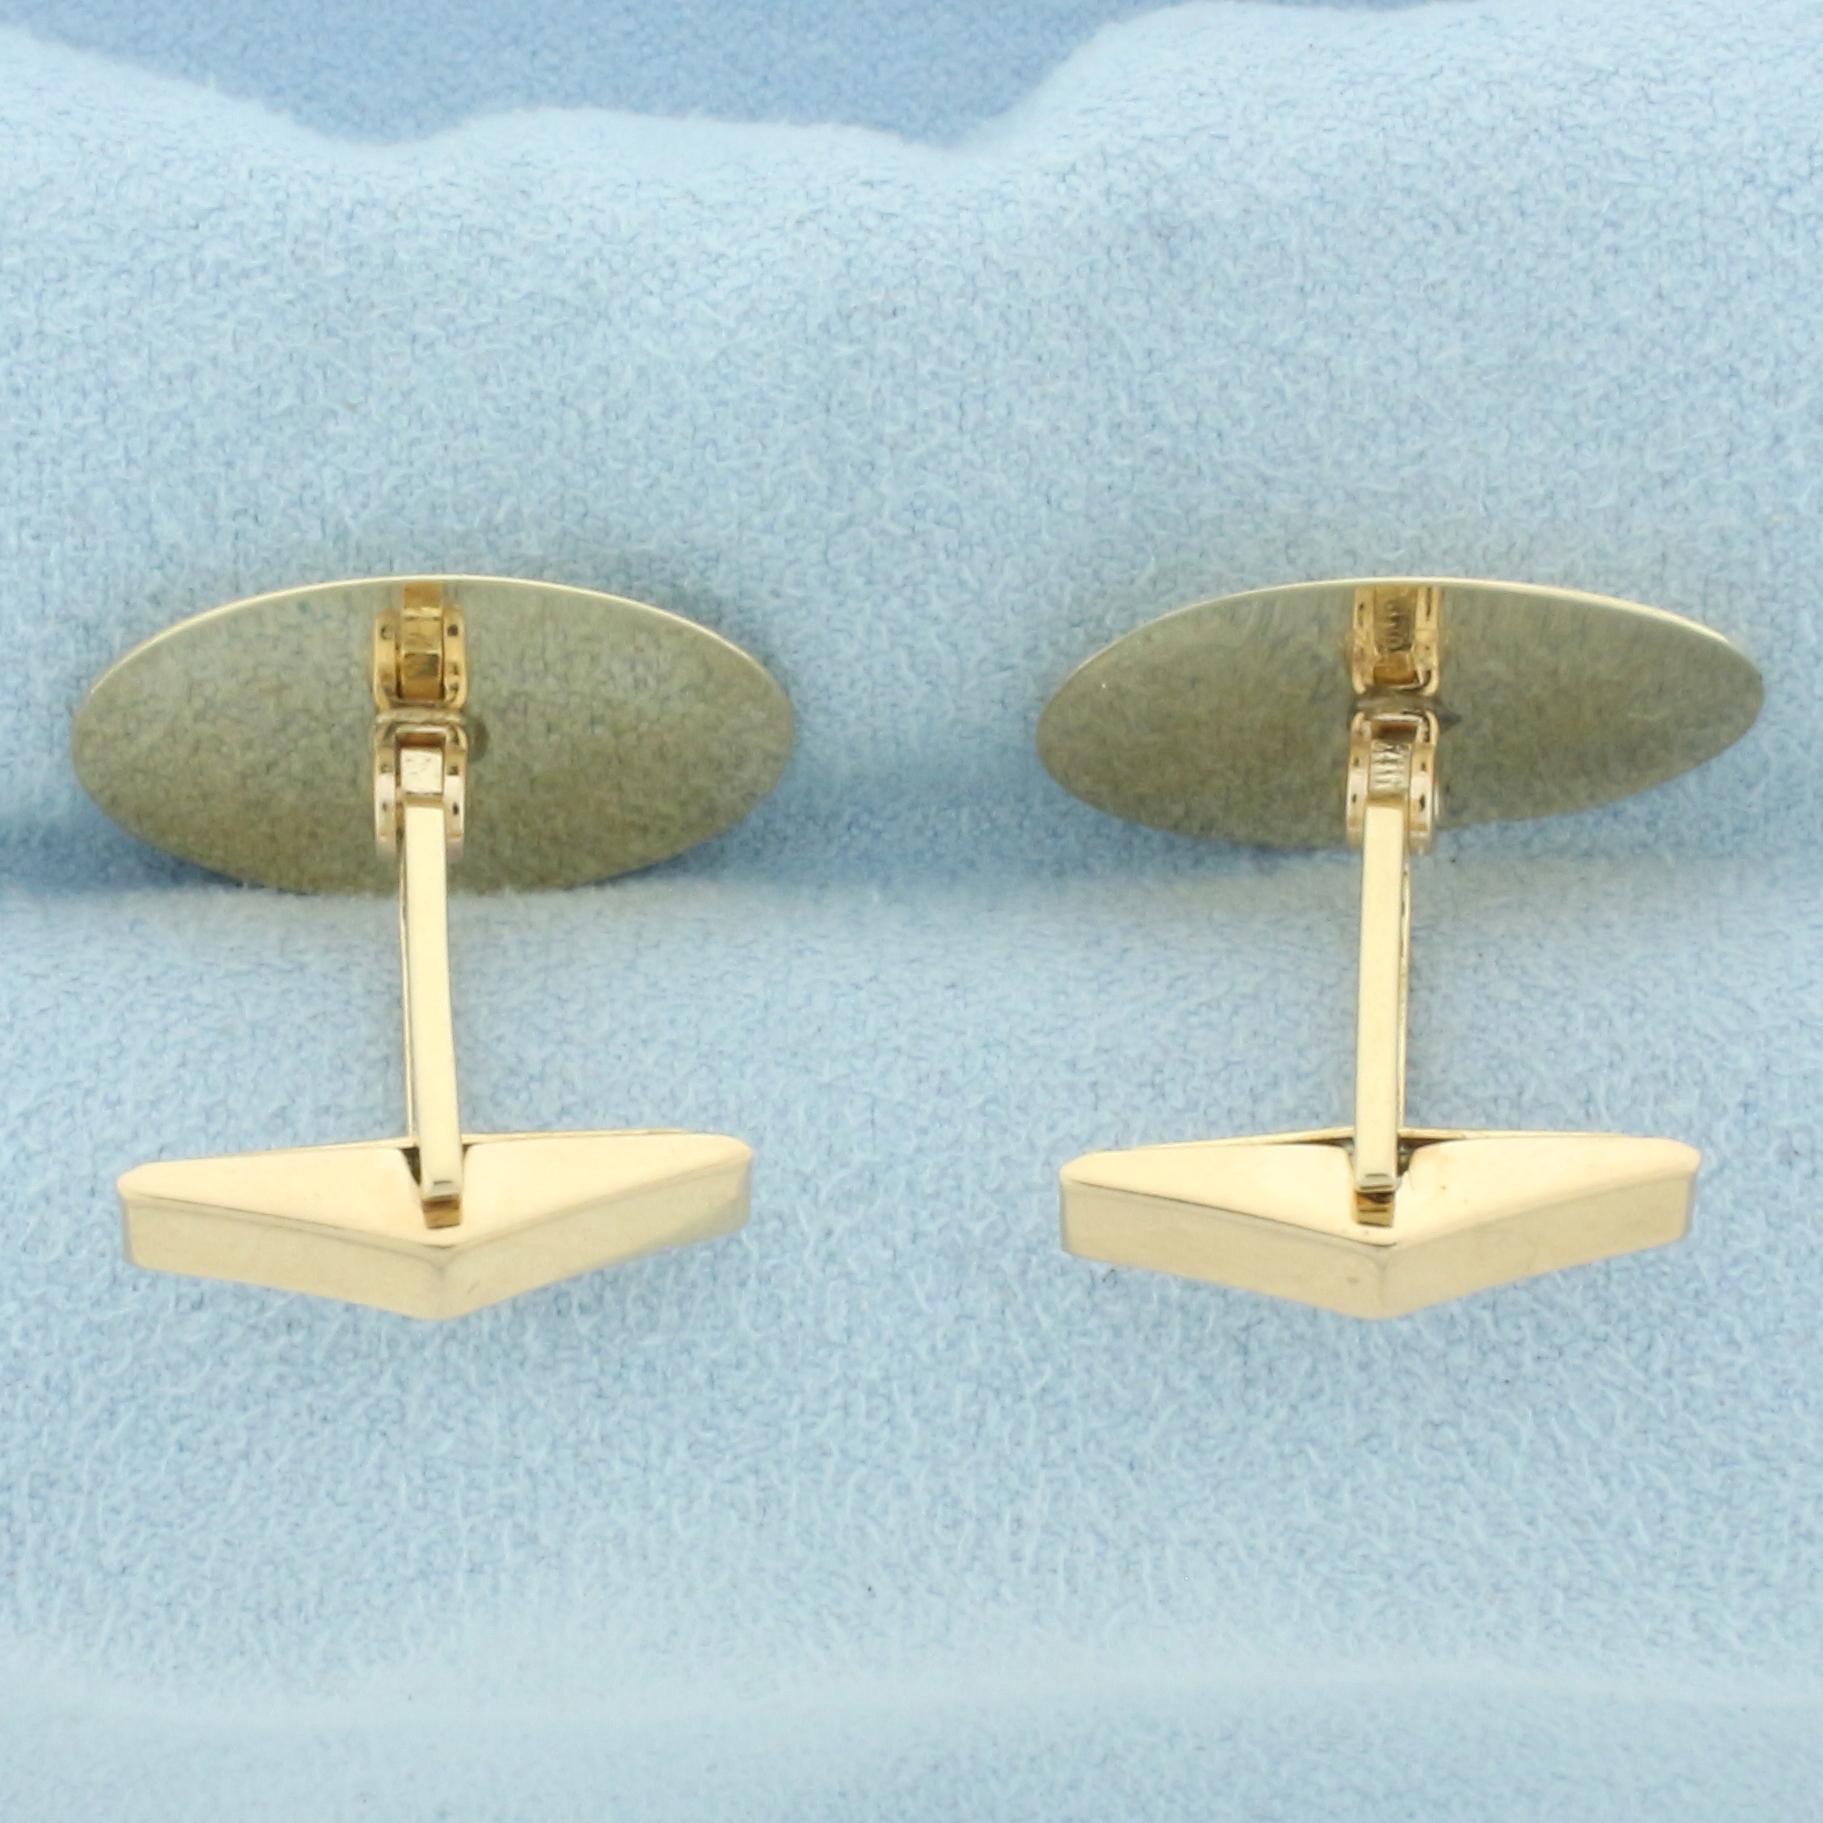 Engravable Oval Cufflinks In 14k Yellow Gold